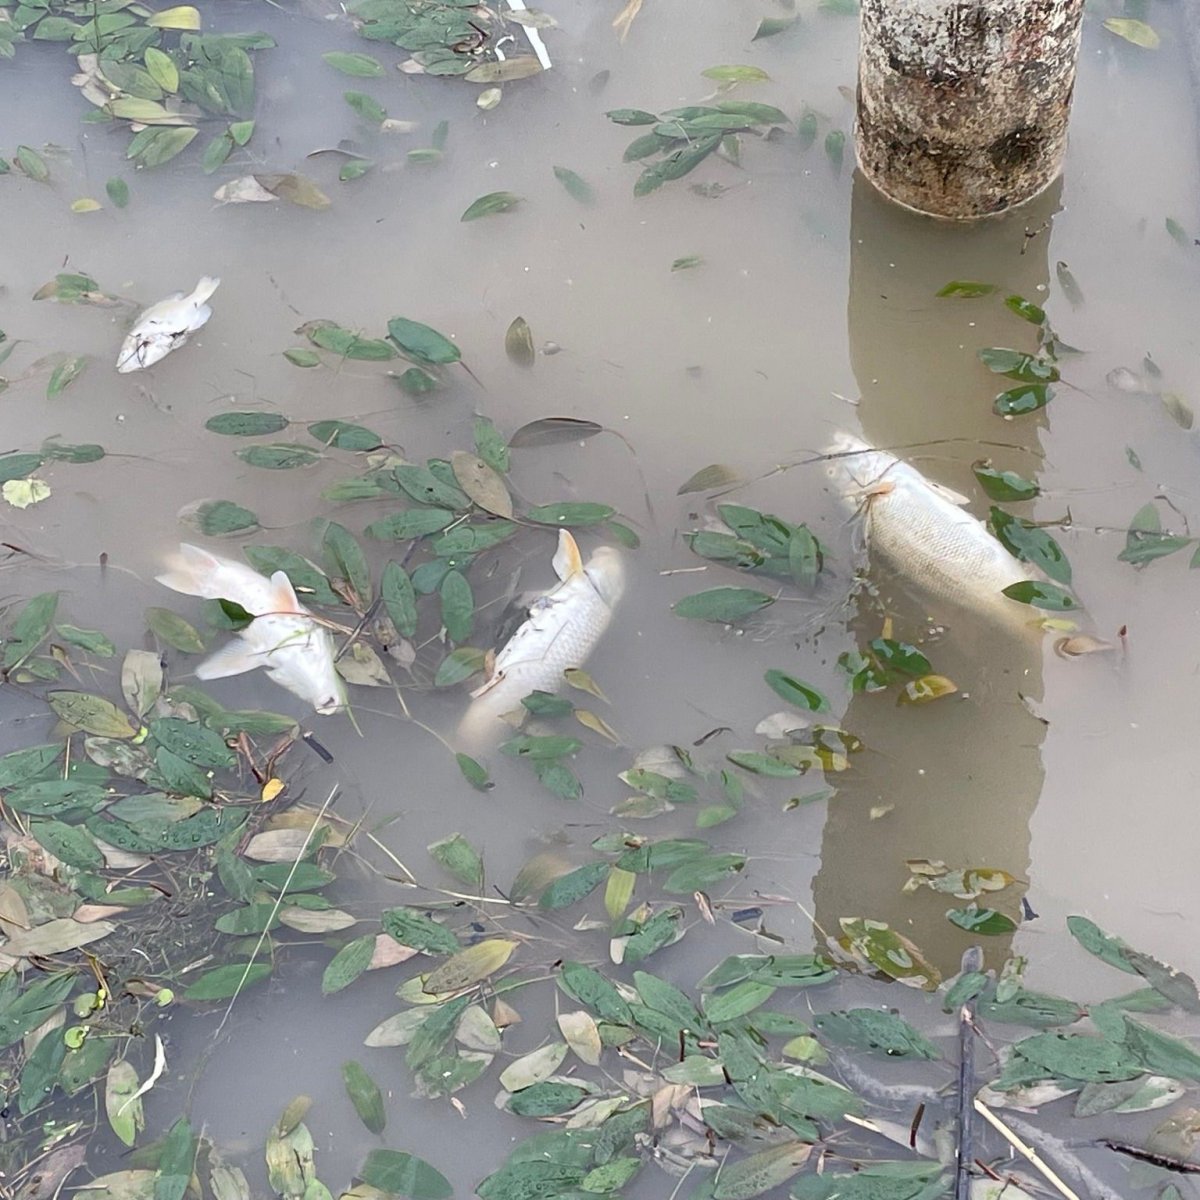 Agencies say the cause of the fish die-off is likely natural. 